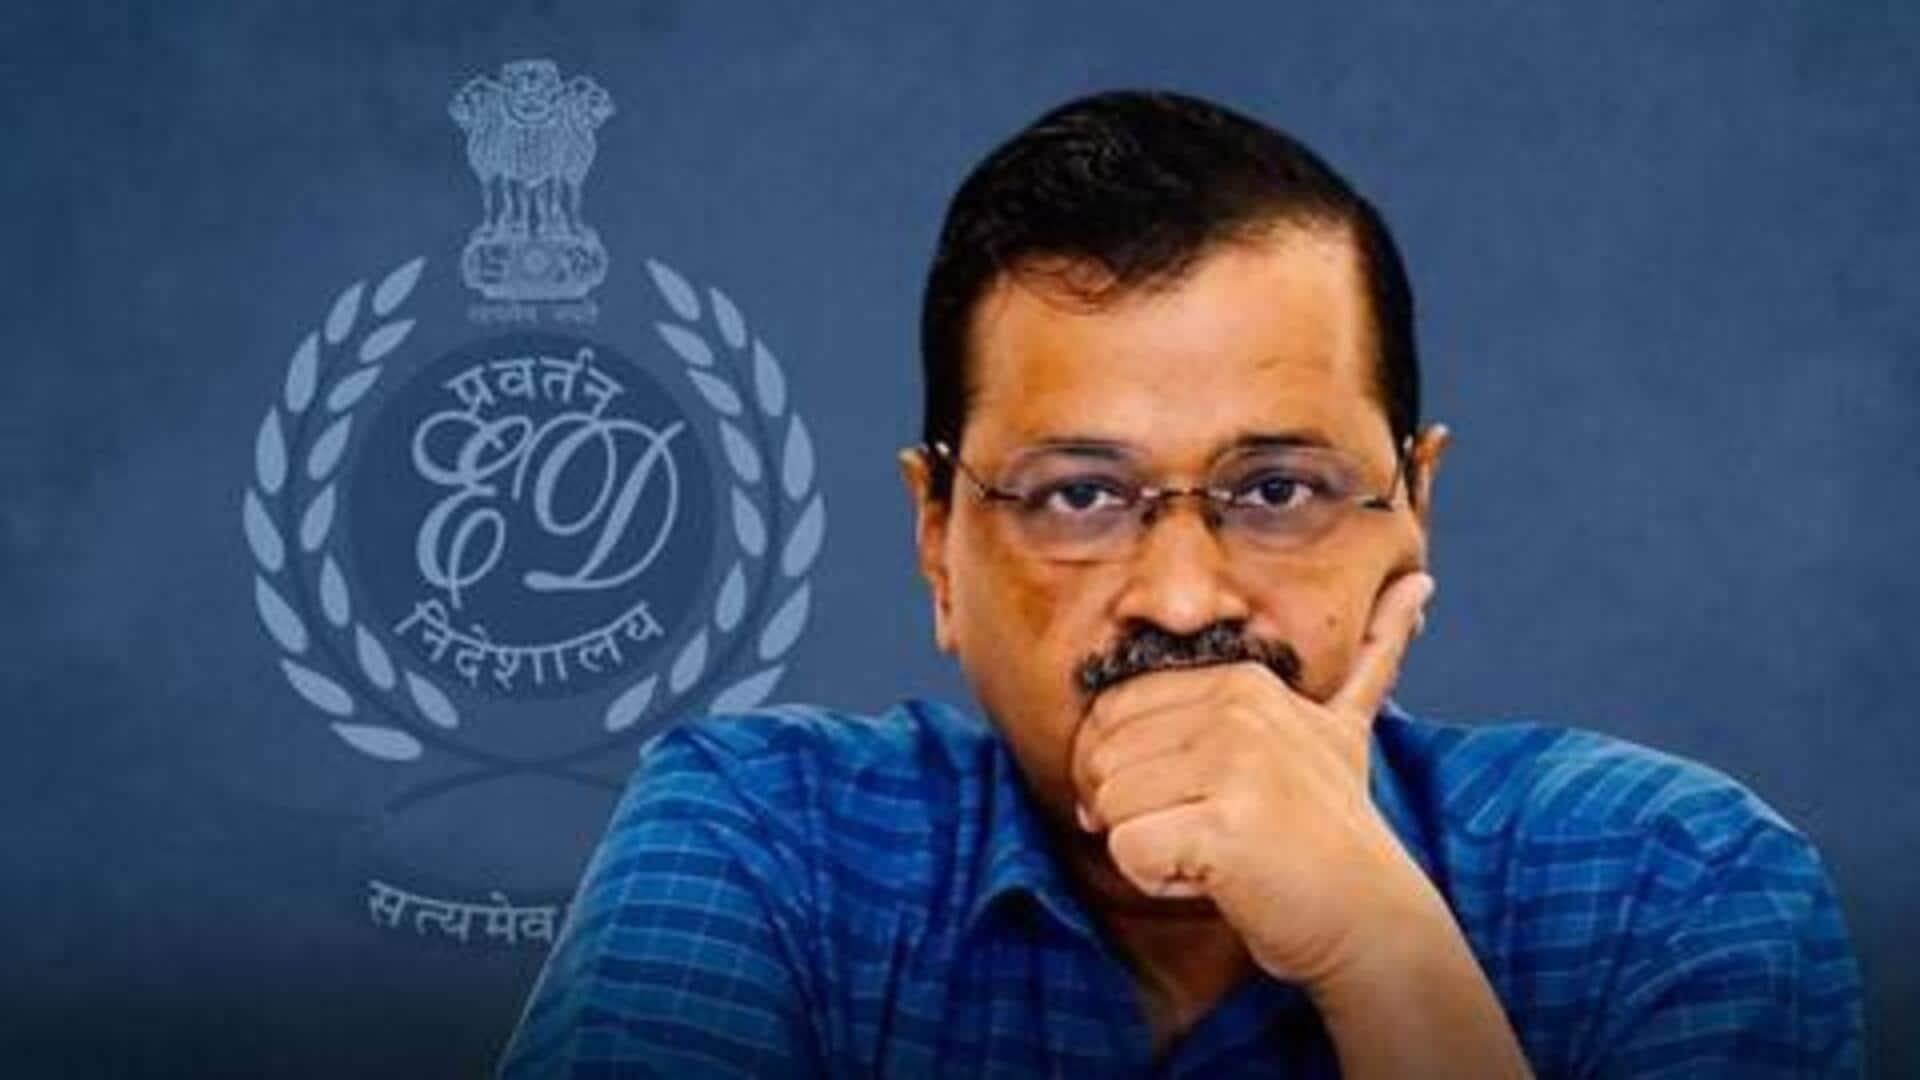 Ready for virtual questioning after March 12: Kejriwal tells ED